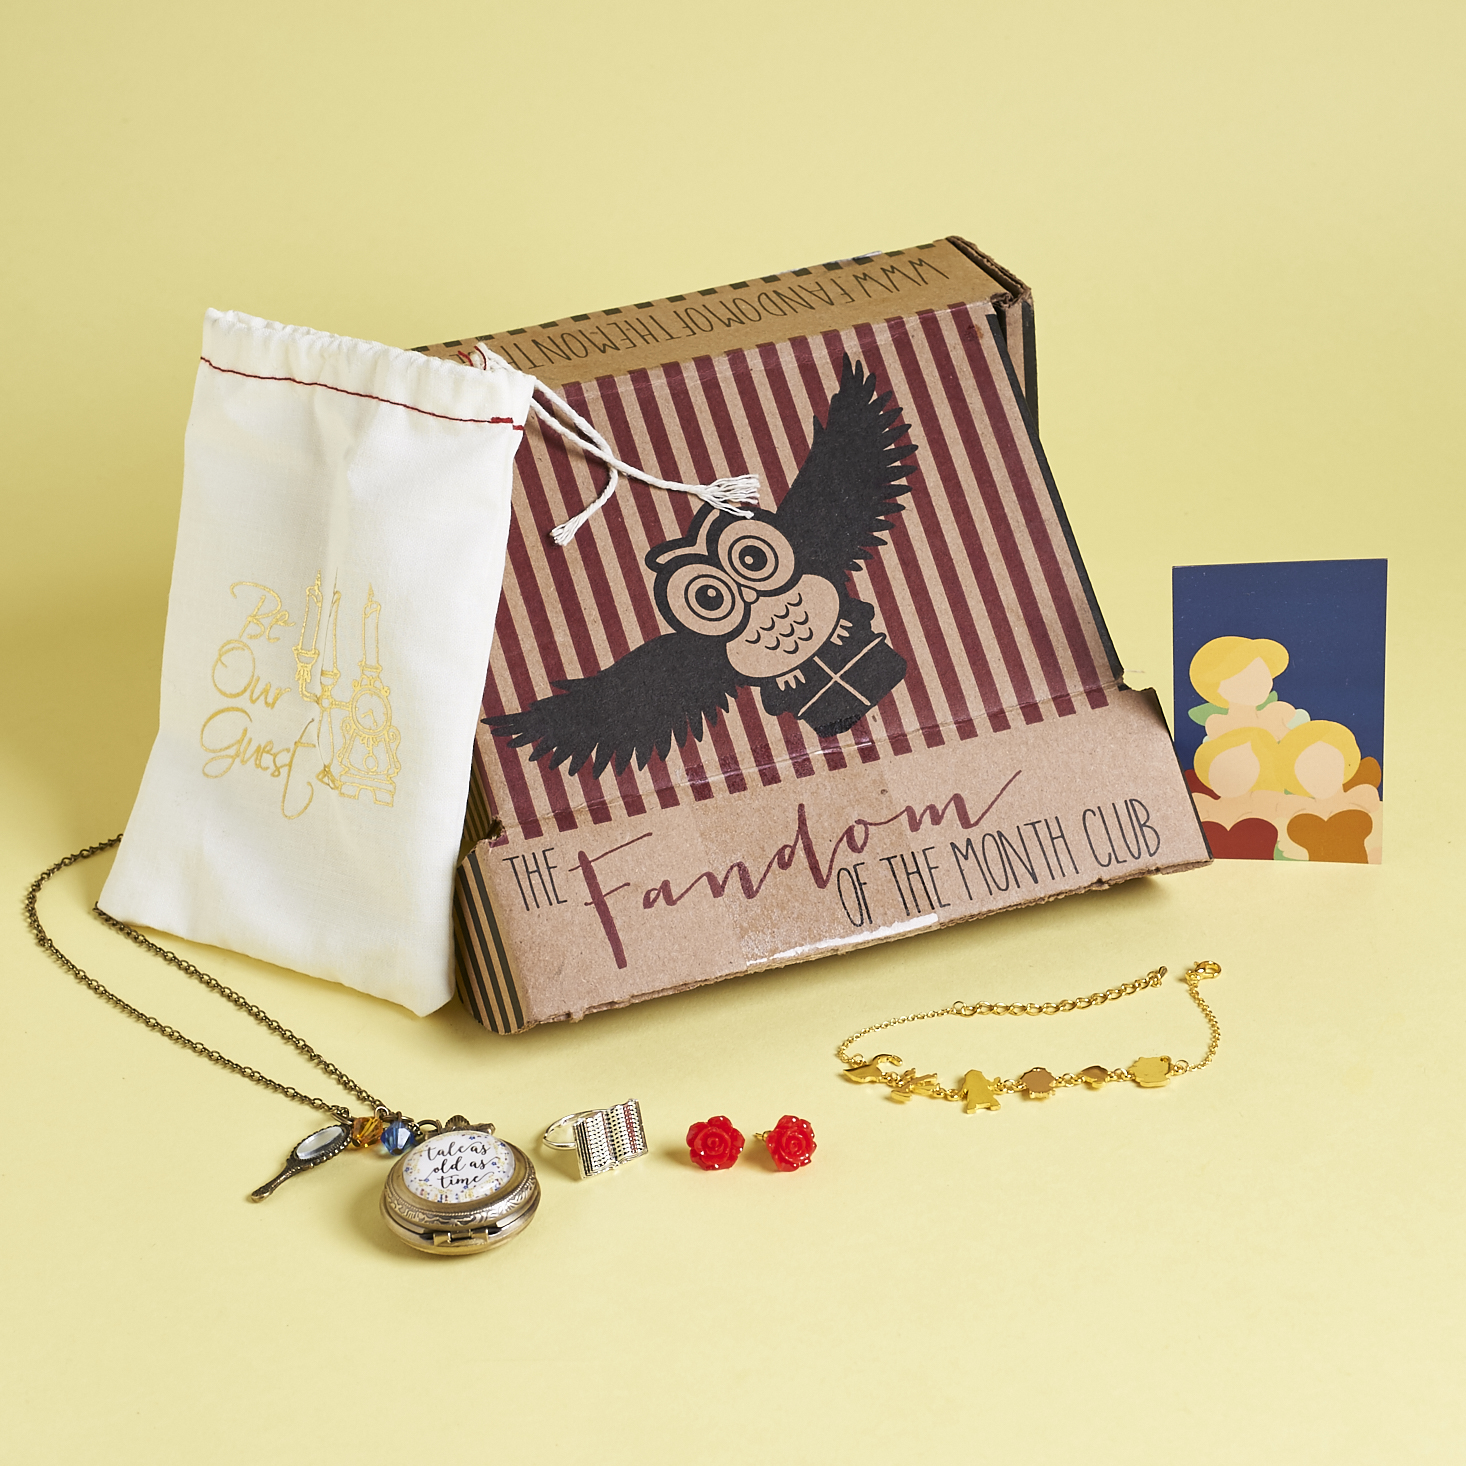 Read our review of this Beauty and the Beast themed box!